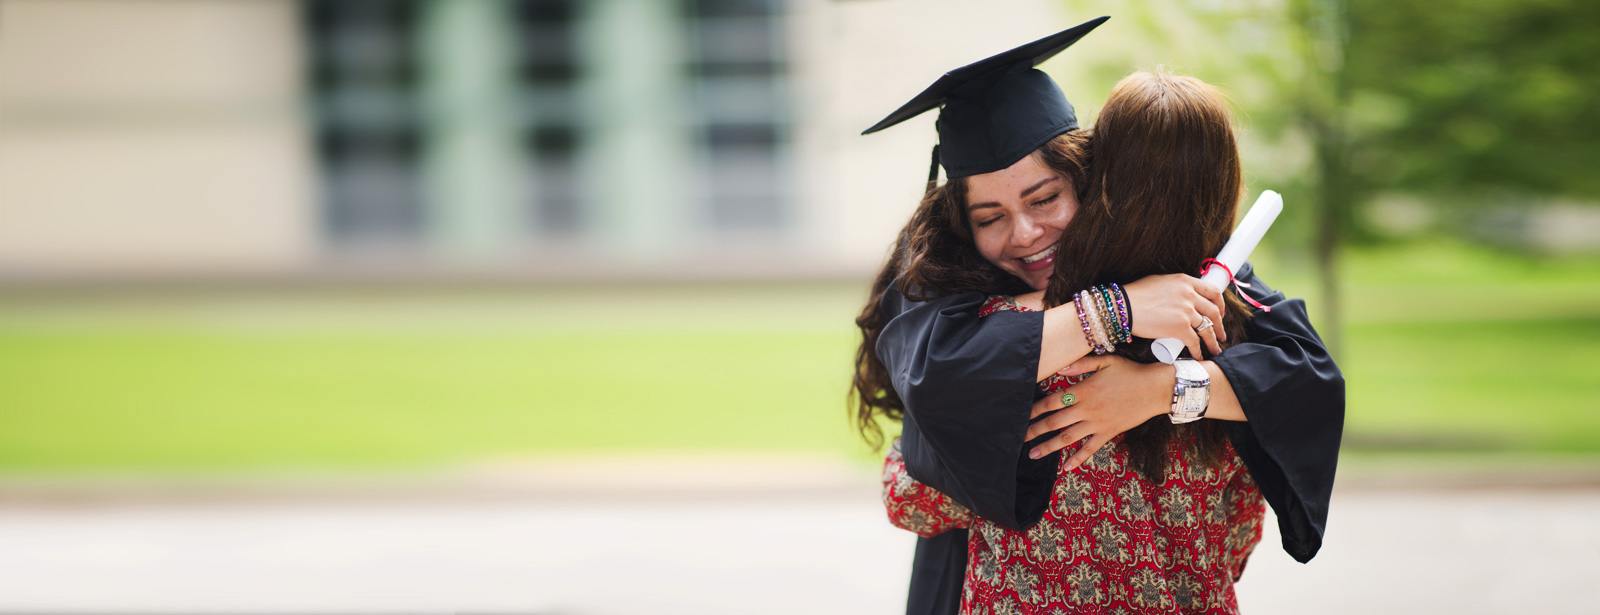 Young Graduate Hugging Her Friend At Graduation Ceremony